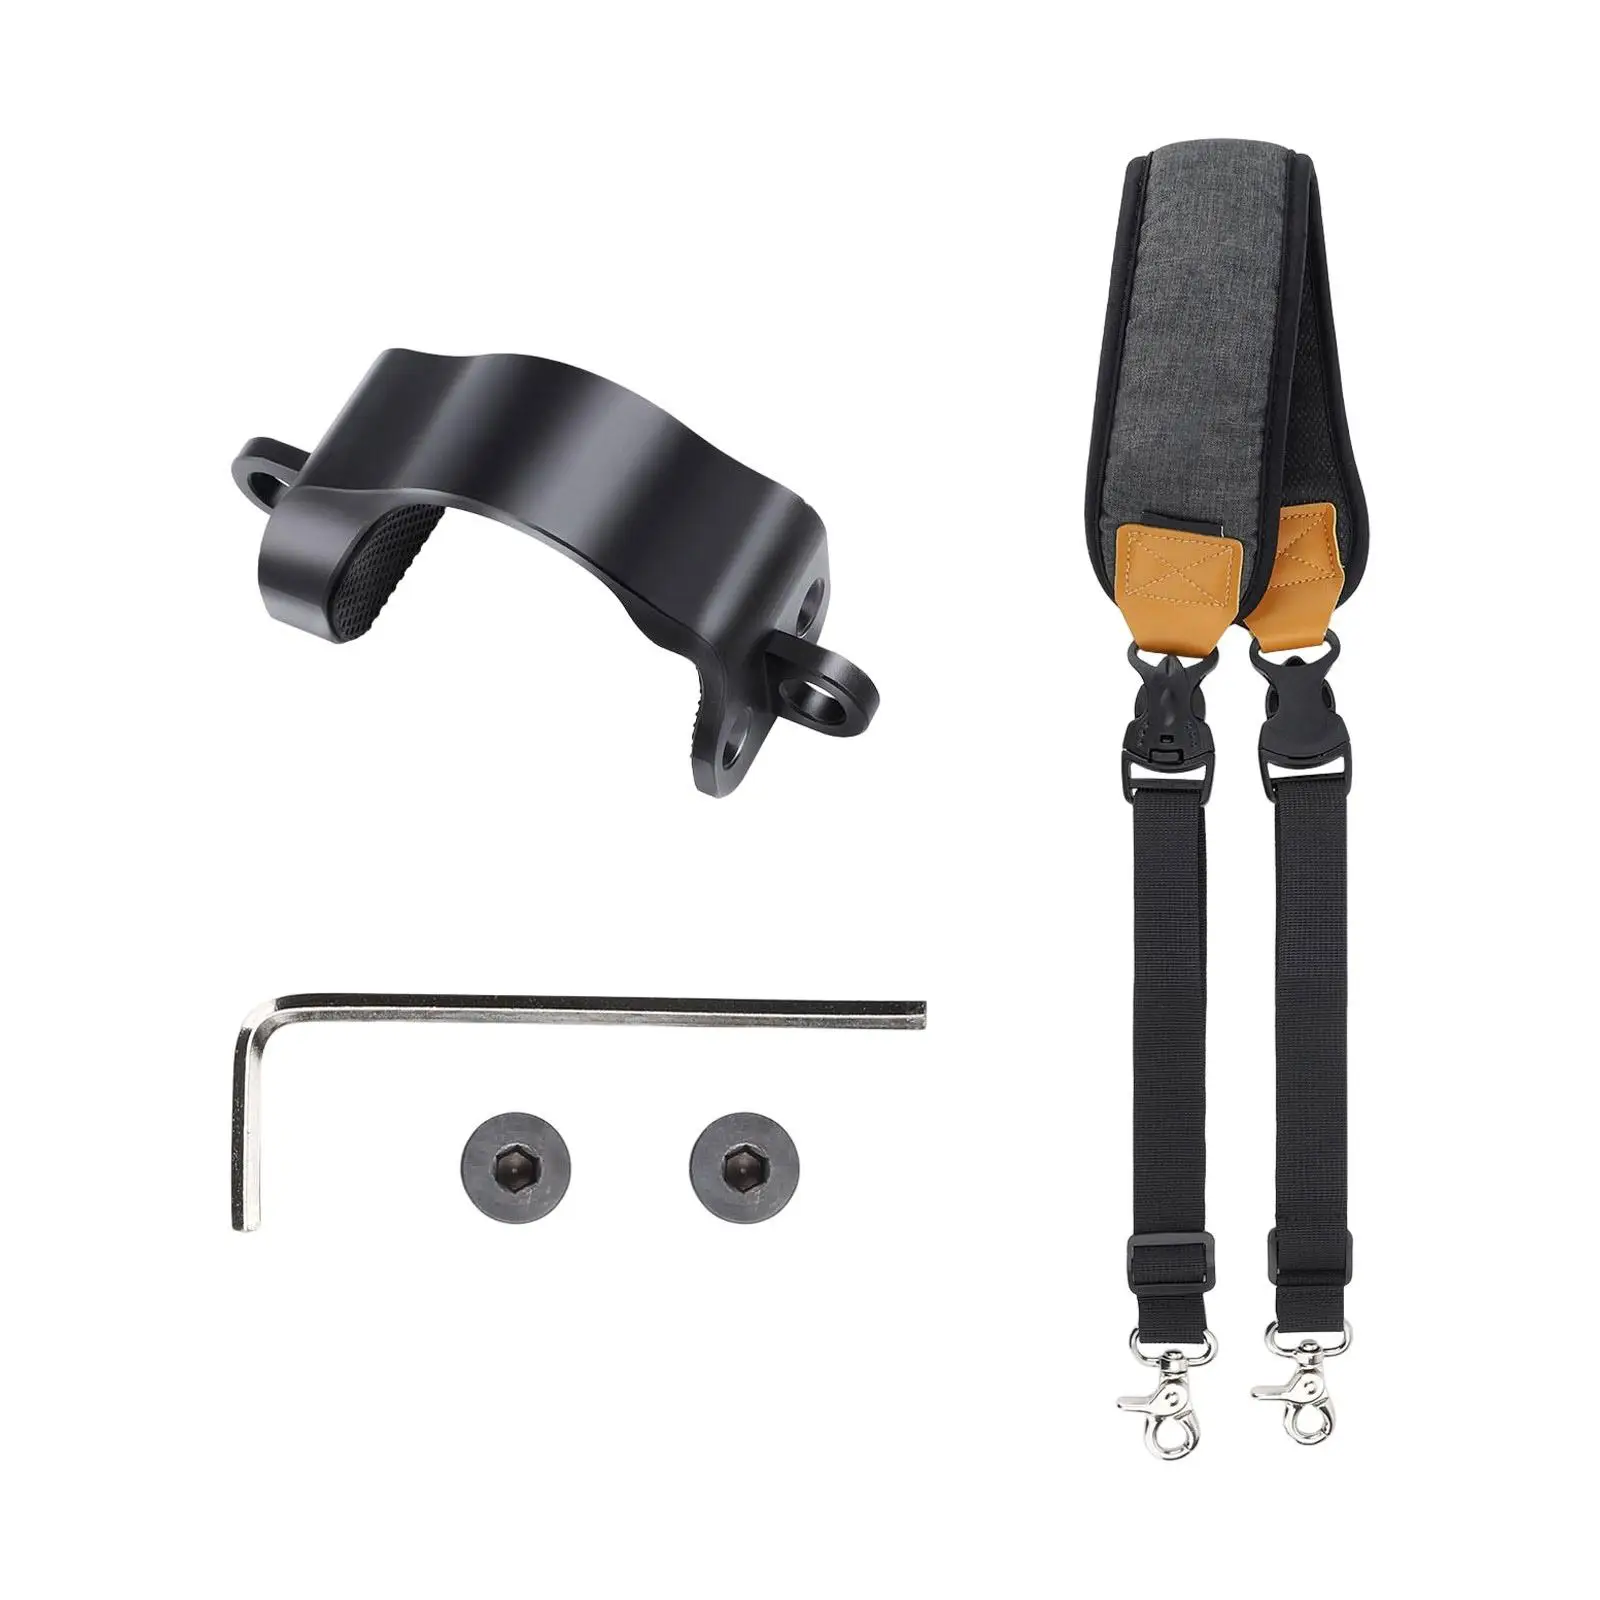 Adjustable Gimbal Stabilizer Lanyard Neck Strap Replacement Accessories Strong Load Bearing Nylon Braided Black for RS3 Mini